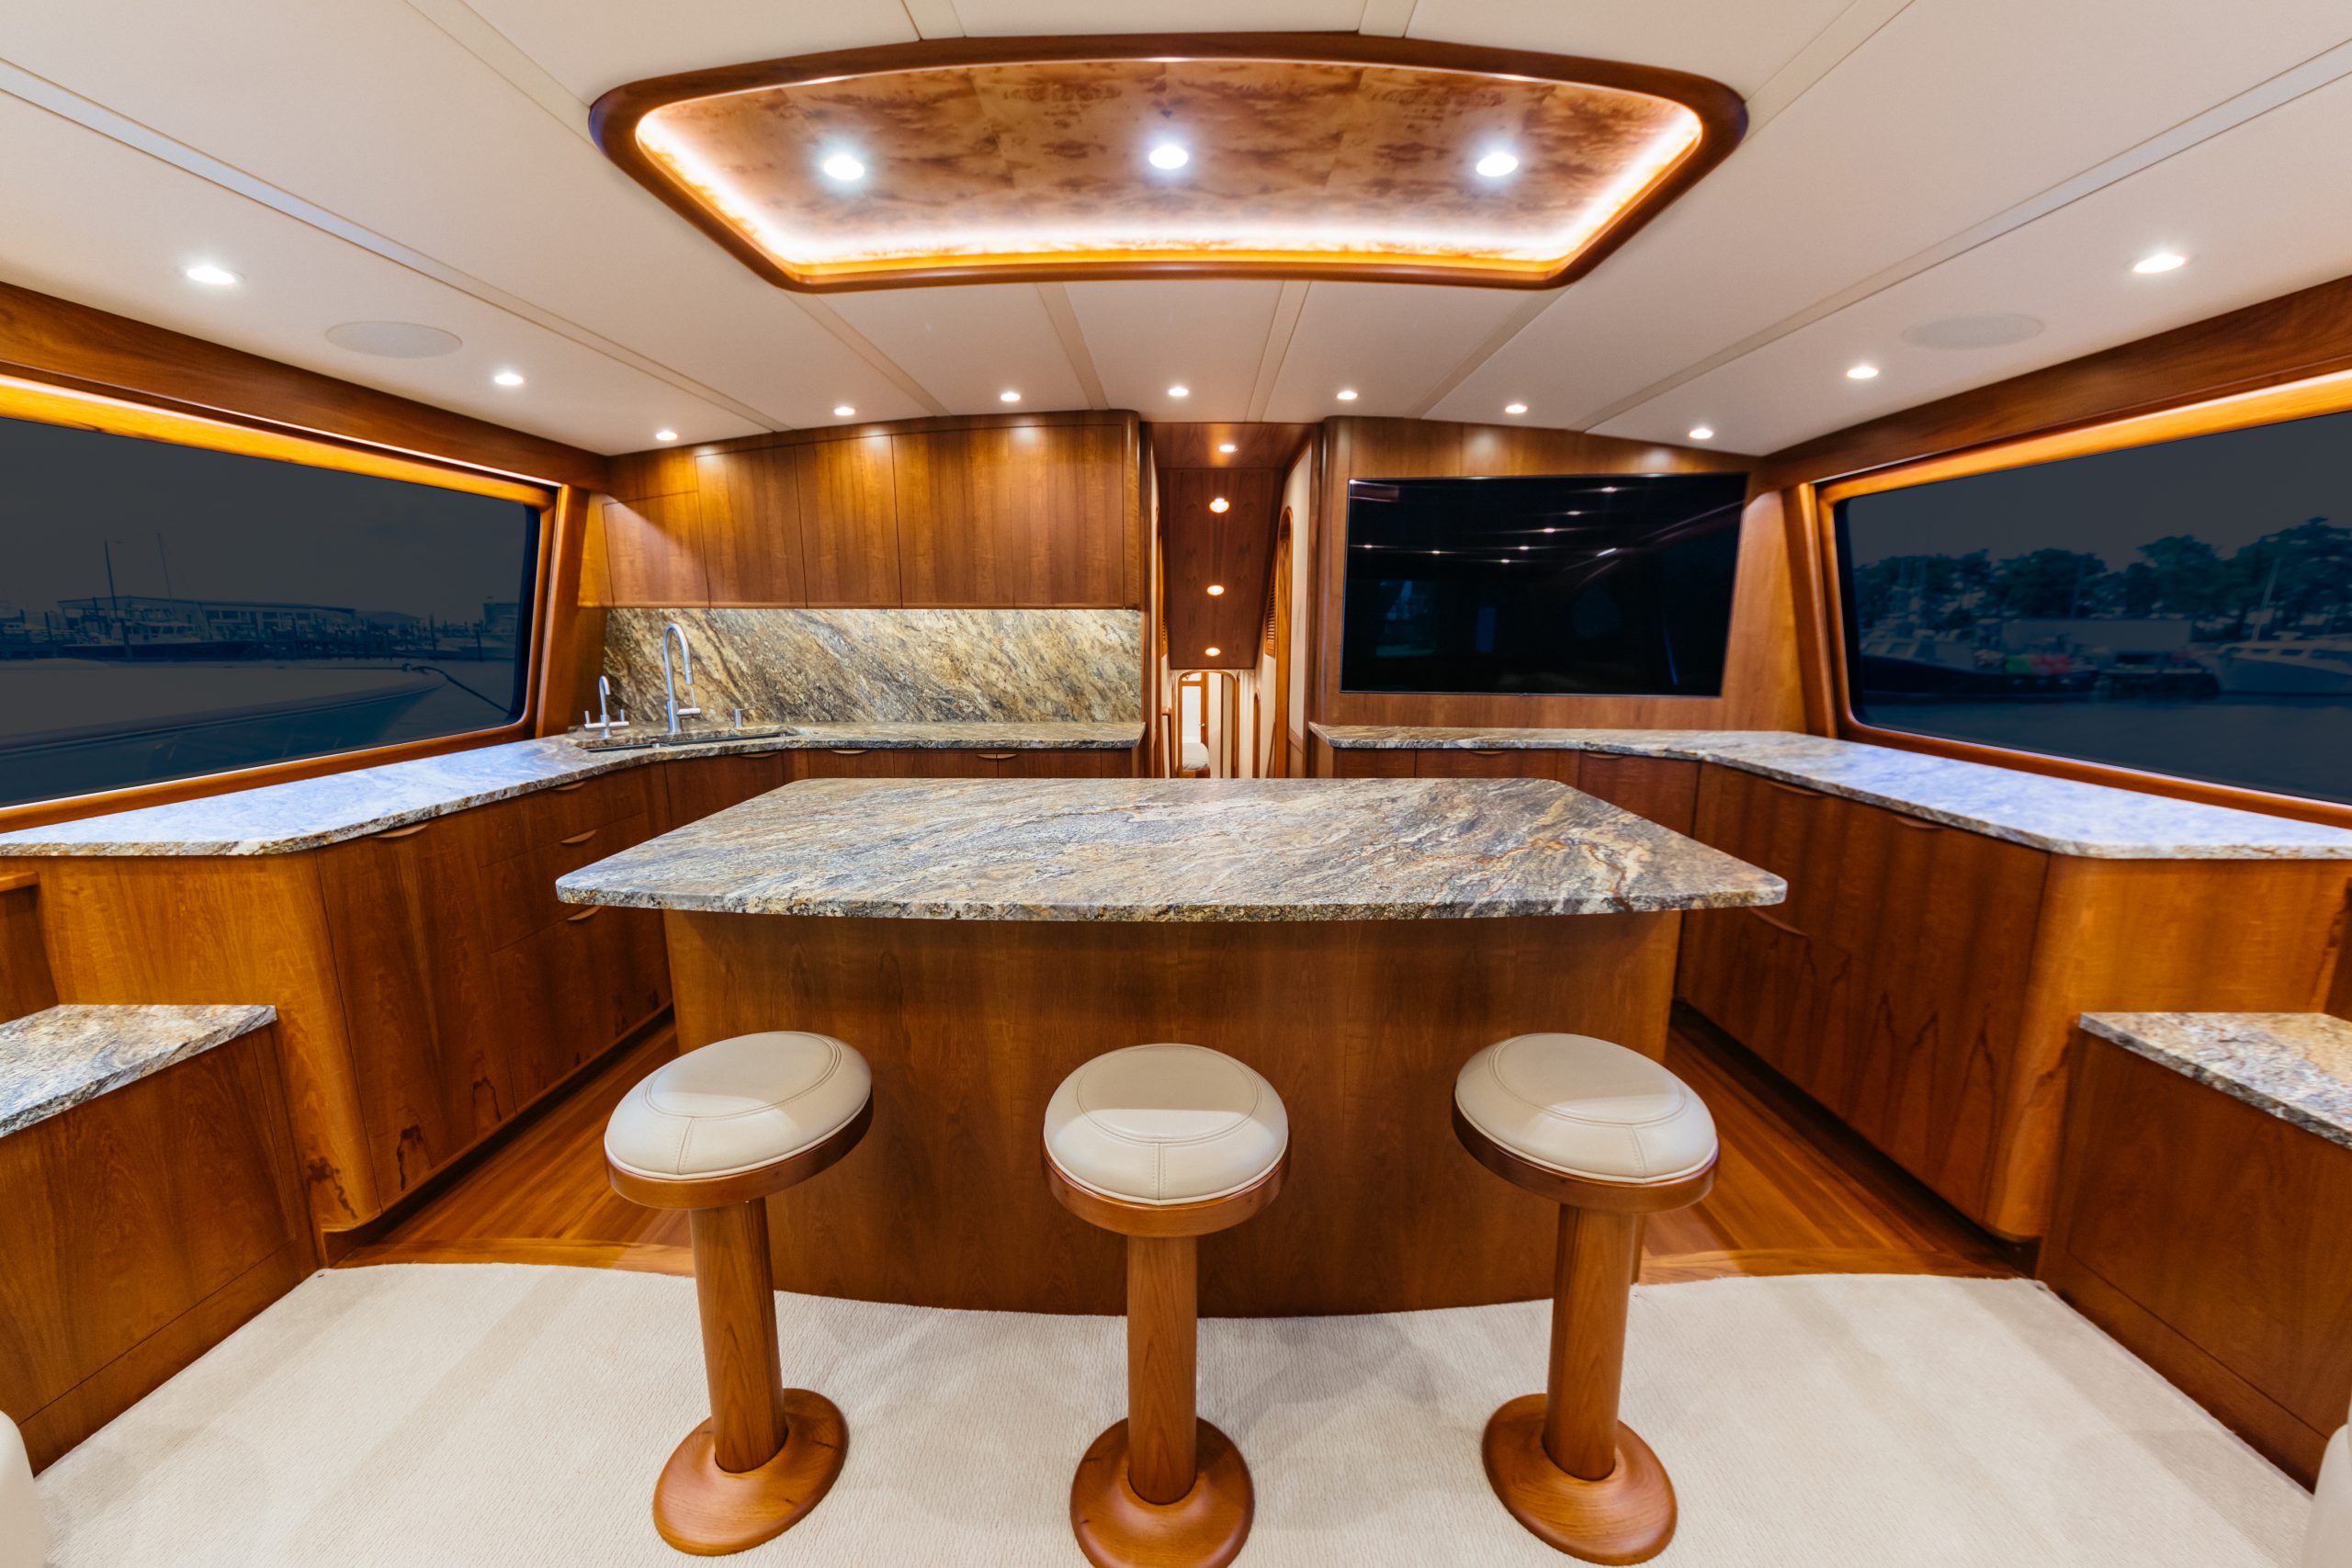 Custom Yacht Interiors - A Look Inside our Cabinetry Shop